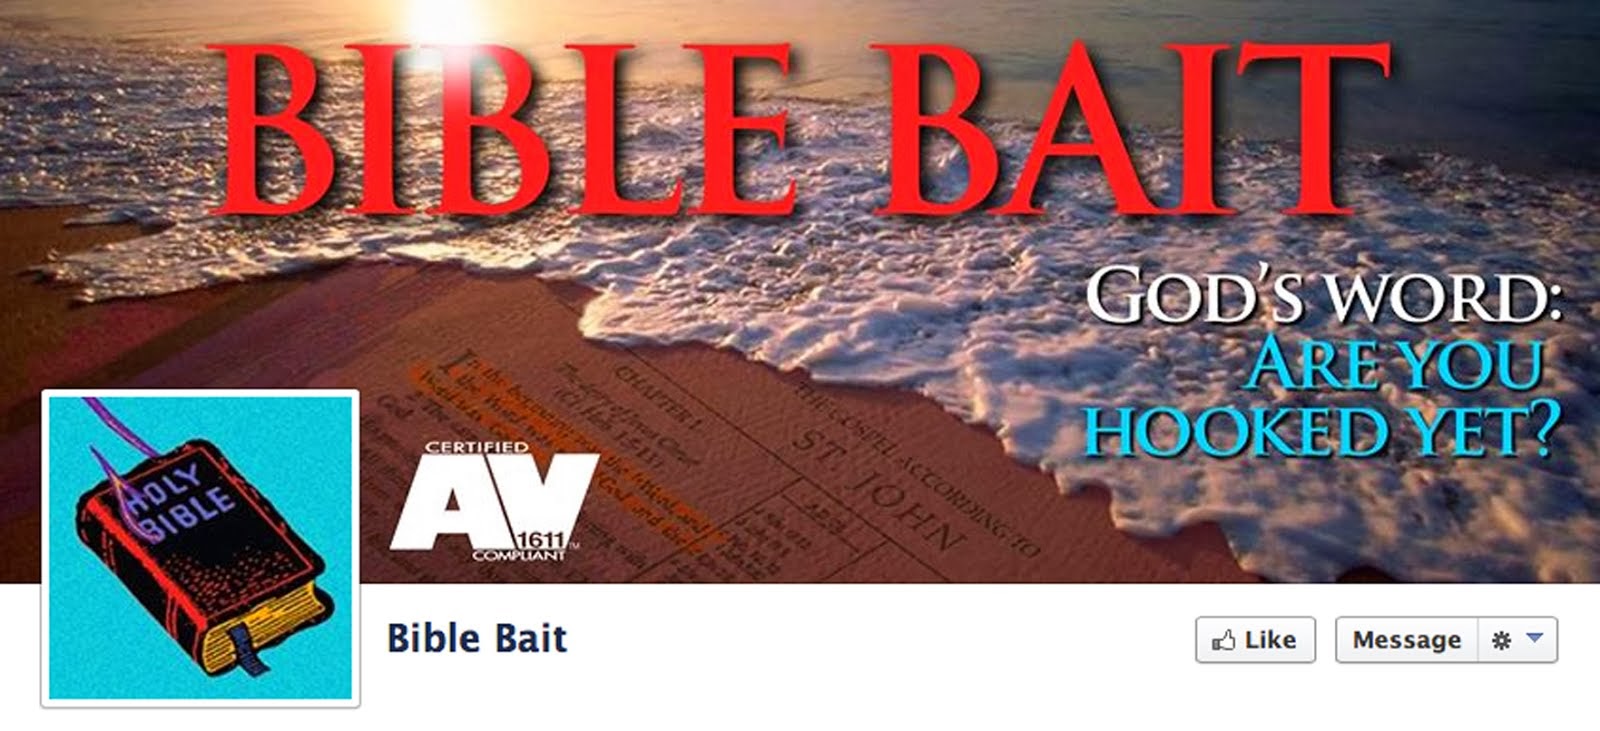 NEW! Bible Bait Facebook Page